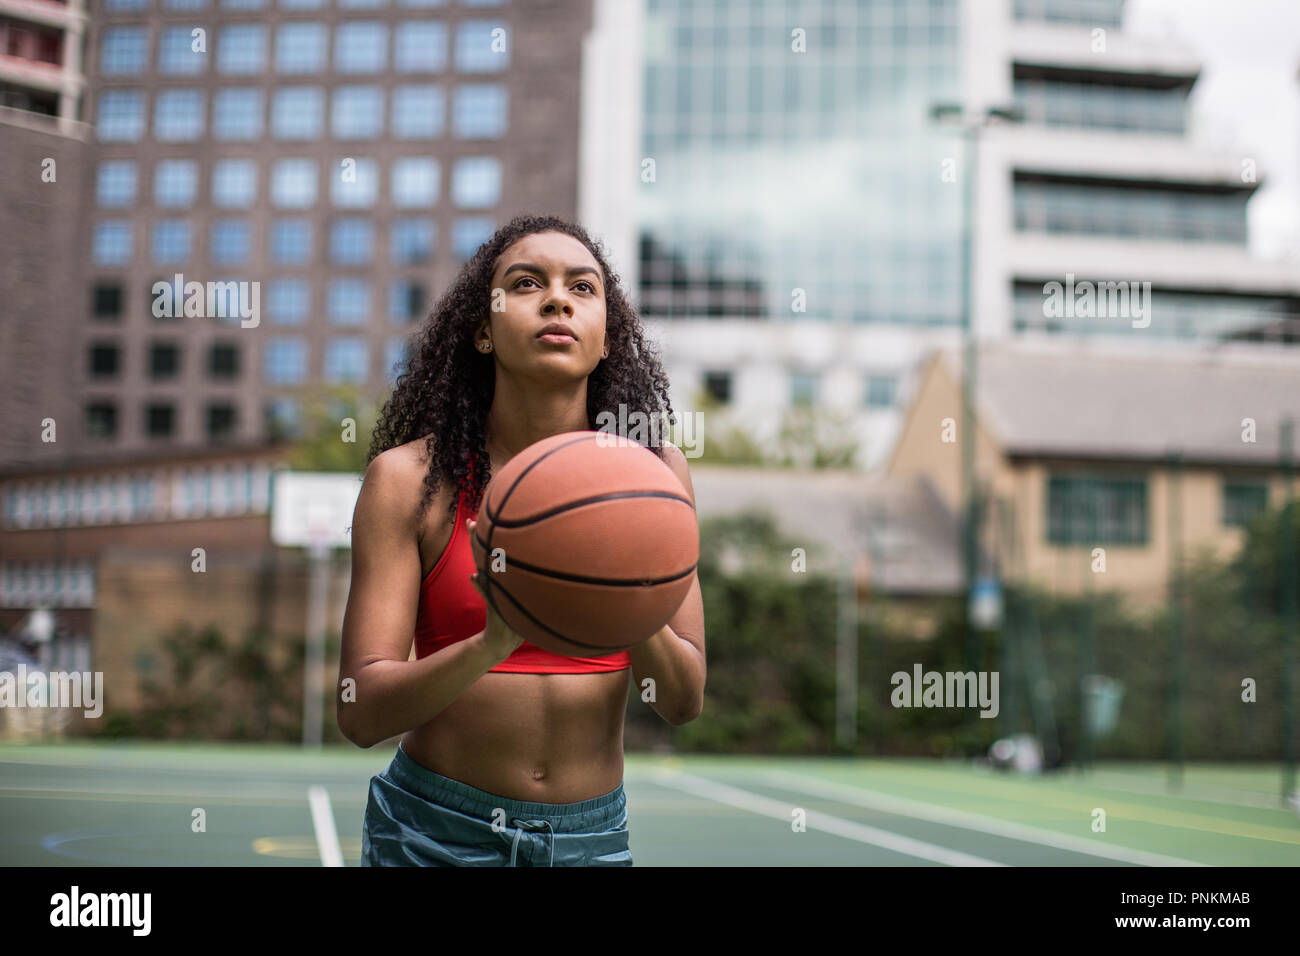 Young adult female basketball player about to shoot a hoop Stock Photo